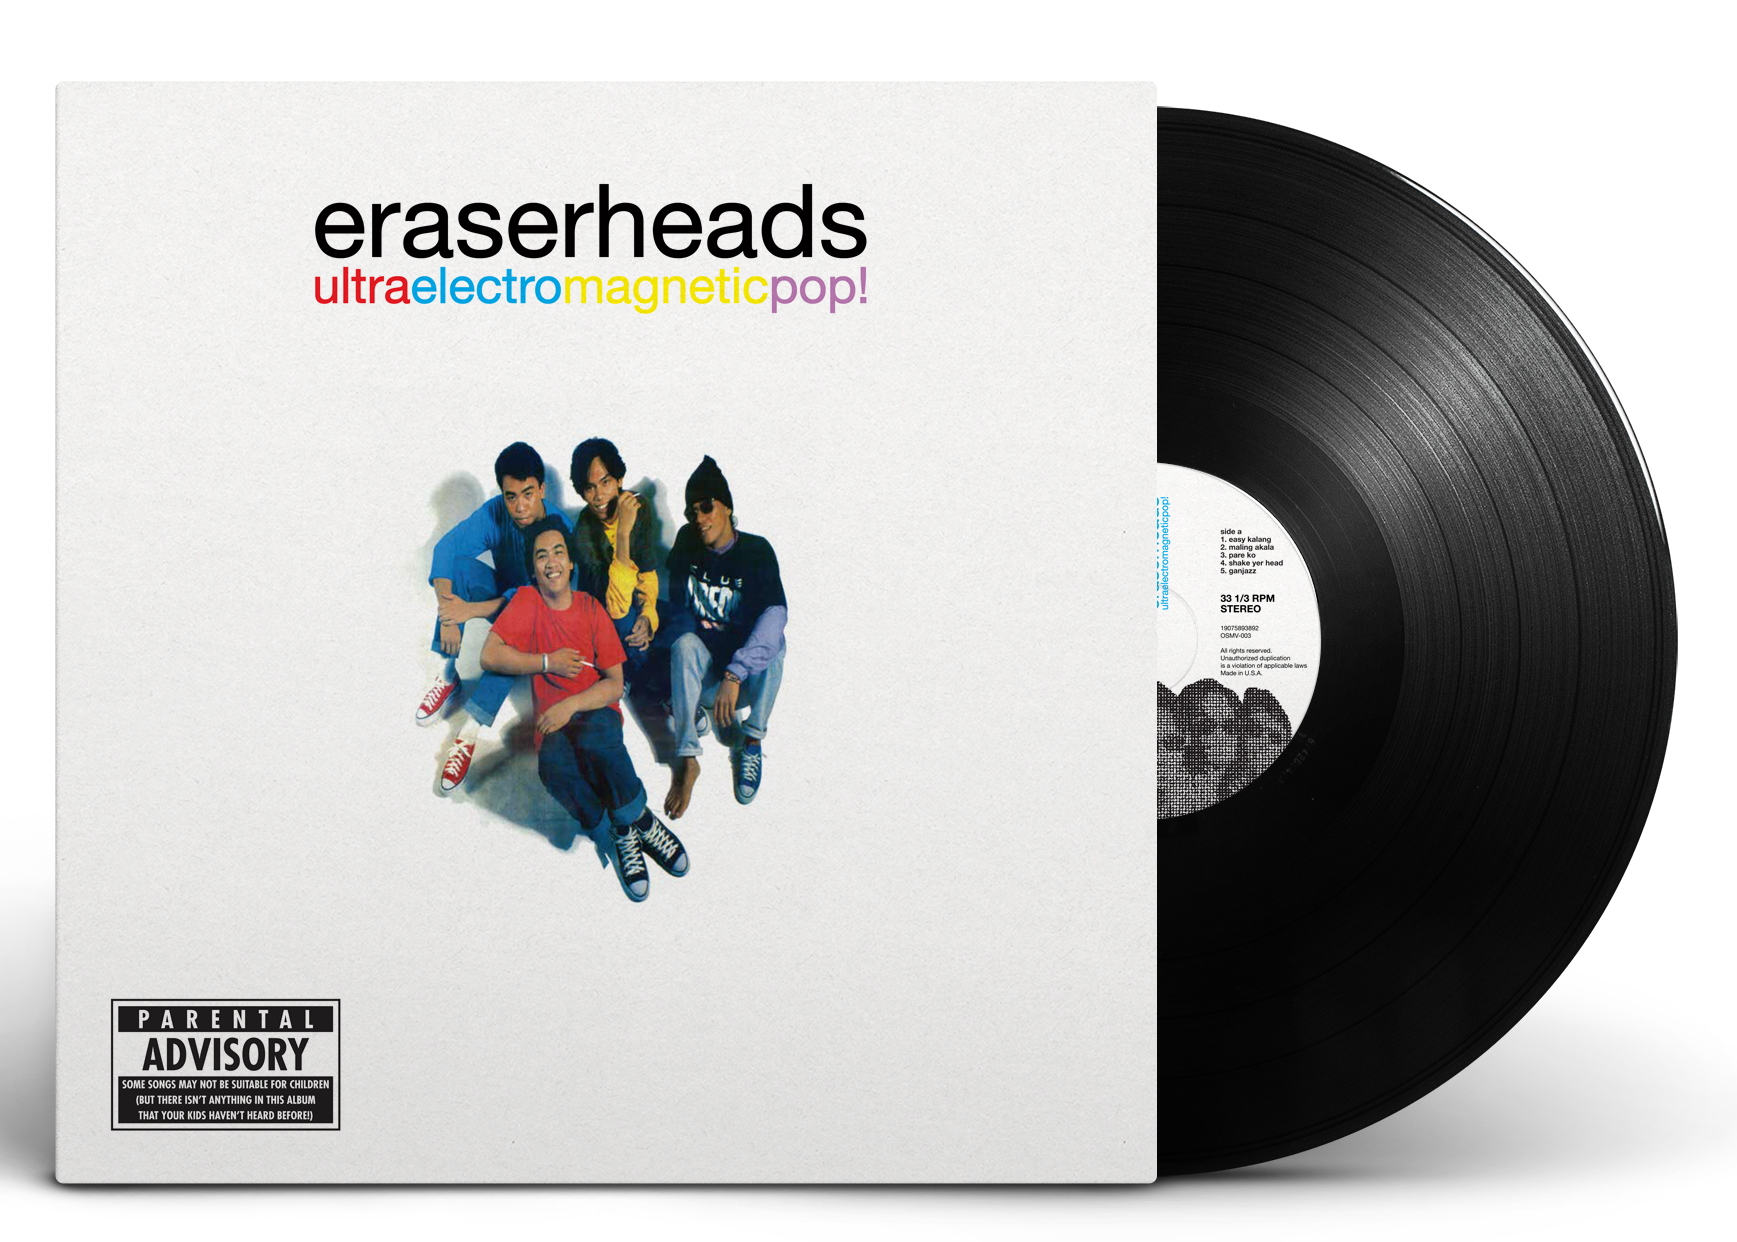 Celebrate The Eraserheads Legacy With Ultraelectromagneticpop Vinyl Launch